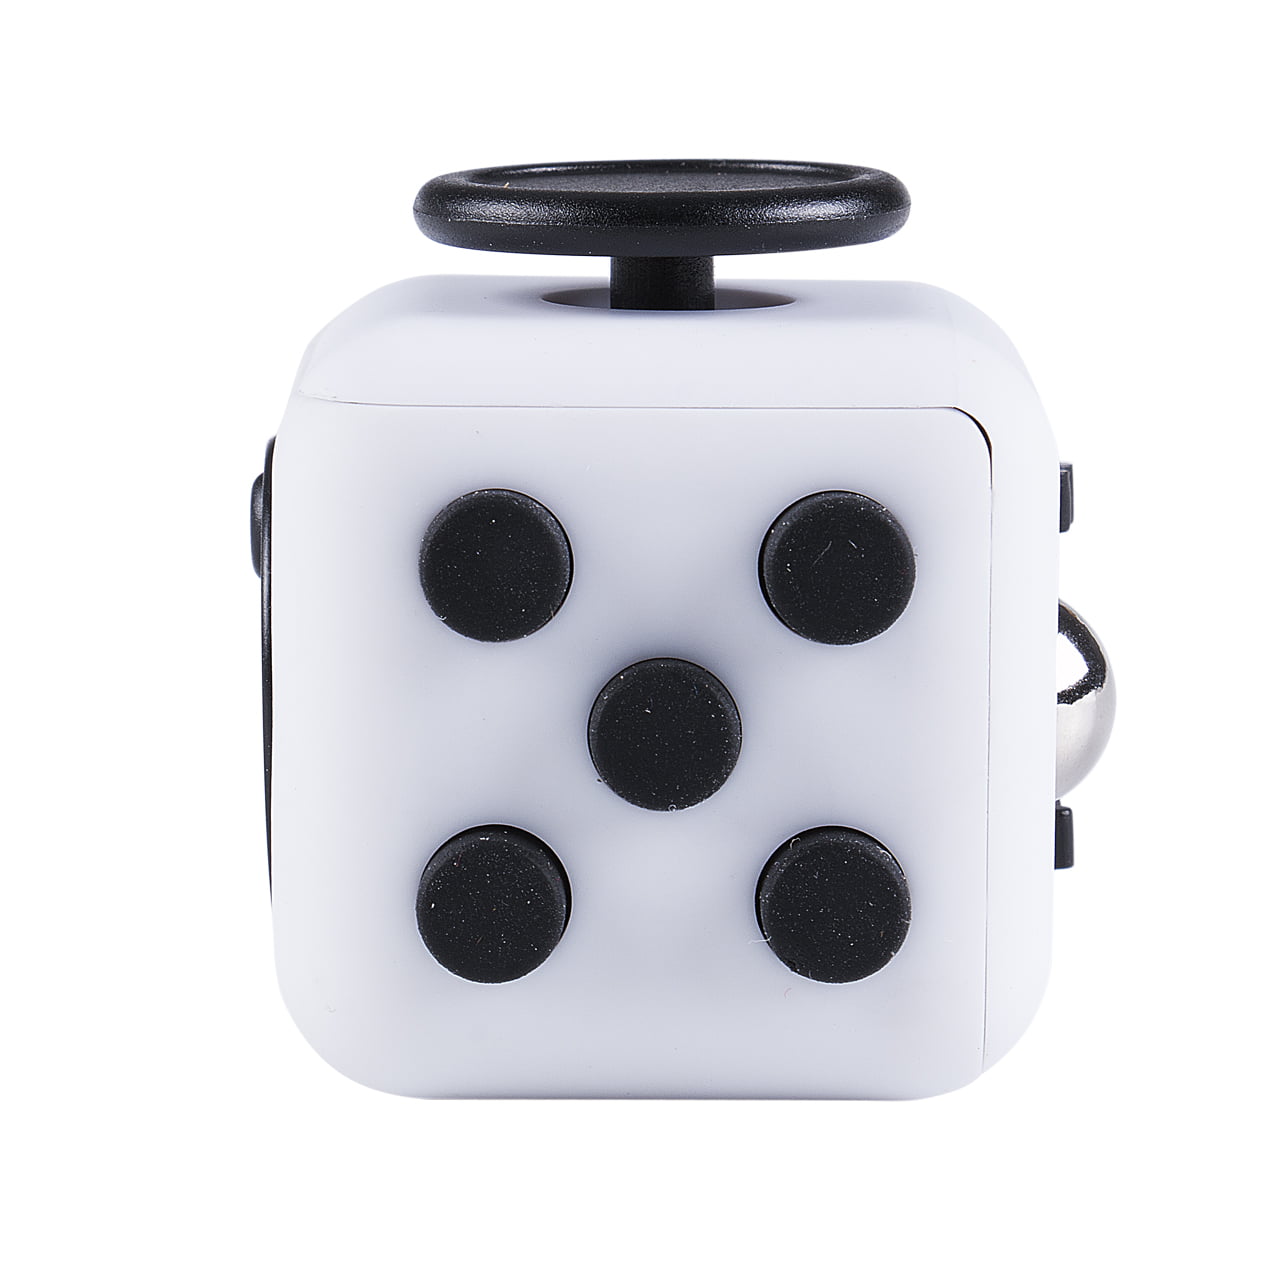 Magic Fidget Cube Toy Anxiety Stress Attention Relief Focus 6-side Kids Gift 